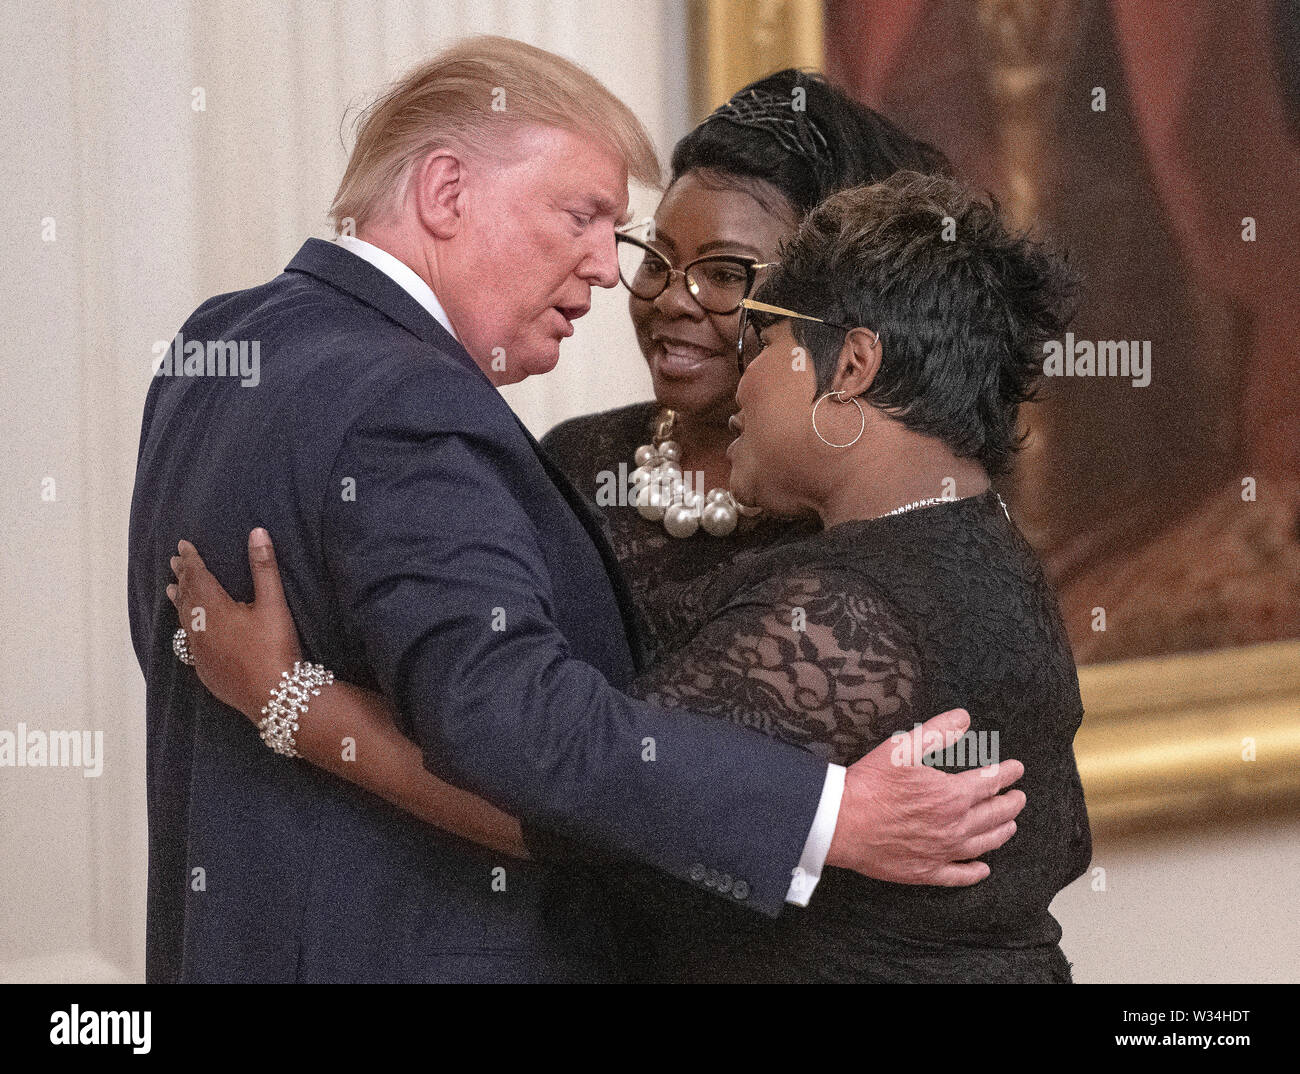 United States President Donald J. Trump hugs Diamond and Silk as he mentions them during his remarks at the Presidential Social Media Summit in the East Room of the White House in Washington, DC on Thursday, July 11, 2019.Credit: Ron Sachs/CNP /MediaPunch Stock Photo